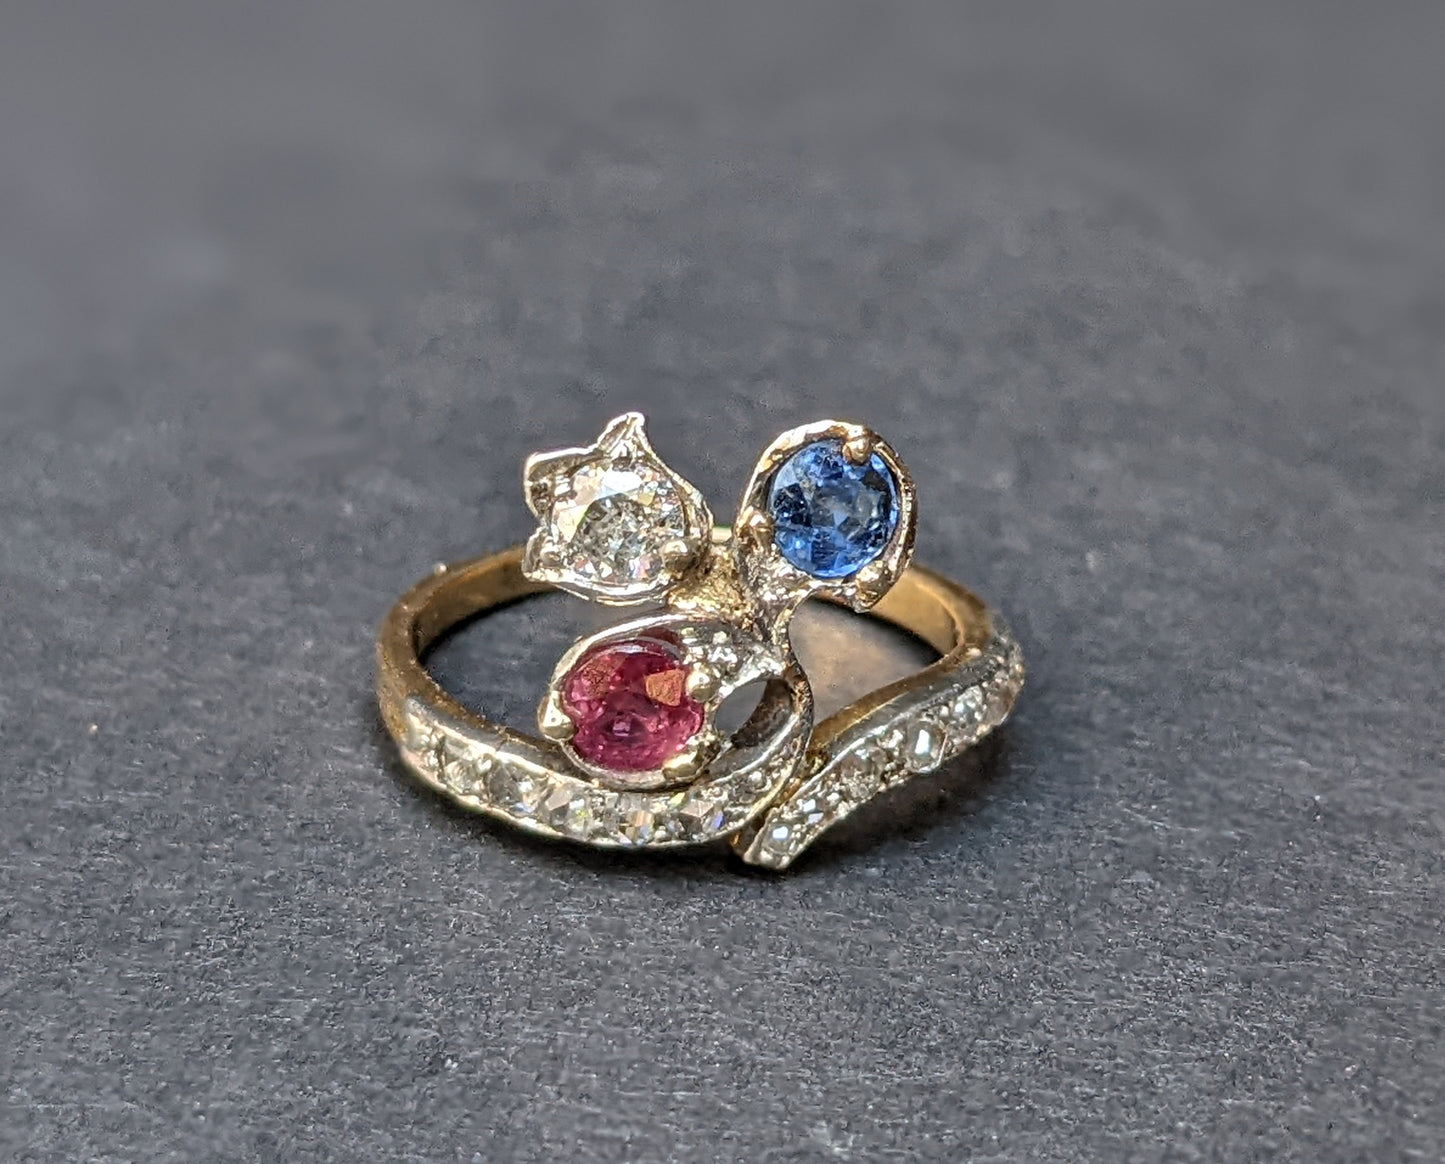 French Belle Epoque Tri- Color Ring